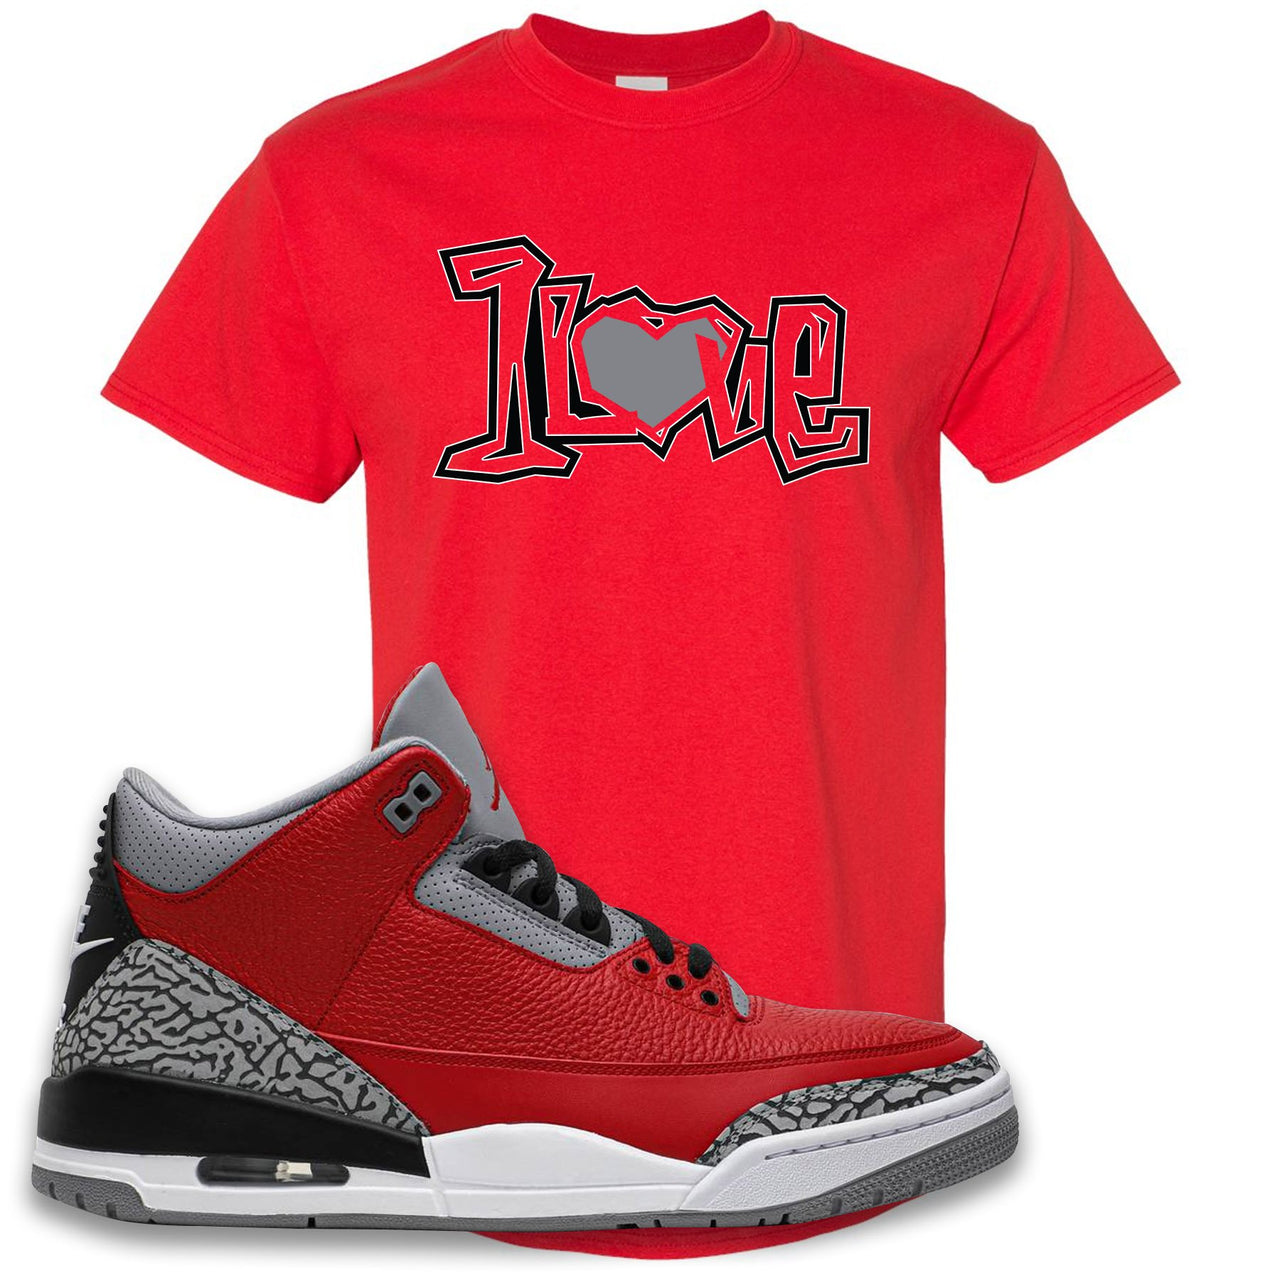 Jordan 3 Red Cement Chicago All-Star Sneaker True Red T Shirt | Tees to match Jordan 3 All Star Red Cement Shoes | 1 Love